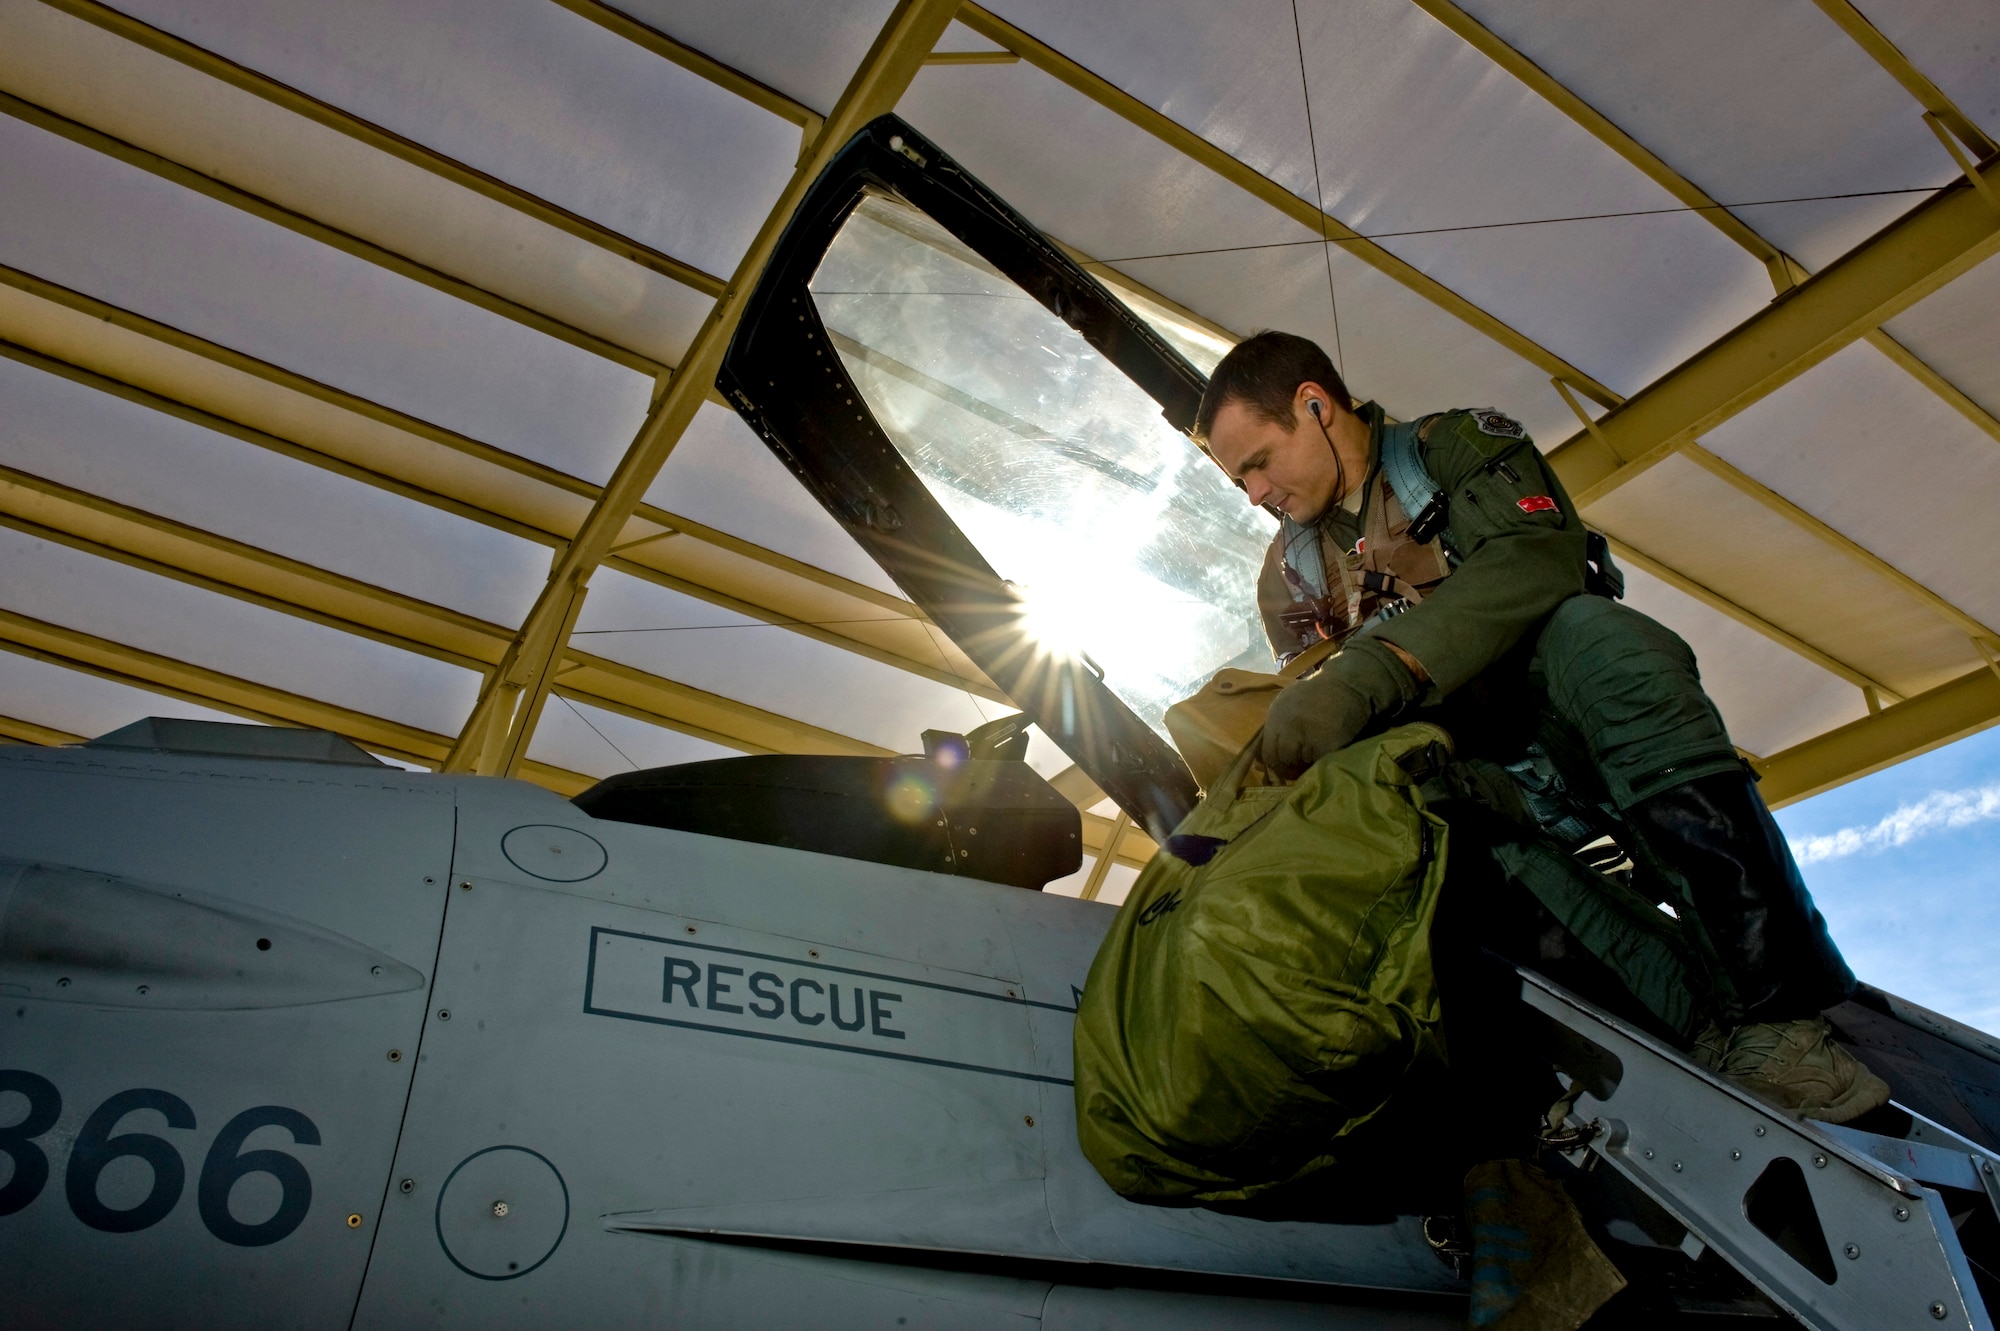 Lt. Col. Marshall Chalverus, 480th Fighter Squadron pilot from Spangdahlem Air Base, Germany, climbs into the cockpit of an F-16 Fighting Falcon during Red Flag 13-2 Jan. 22, 2013, at Nellis Air Force Base, Nev. This is the first time the 480th FS has been taking part in both Red Flag and Green Flag exercises at the same time. The squadron is participating in Red Flag 13-2 and Green Flag 13-3 until Feb. 1.  (U.S. Air Force photo by Senior Airman Daniel Hughes)